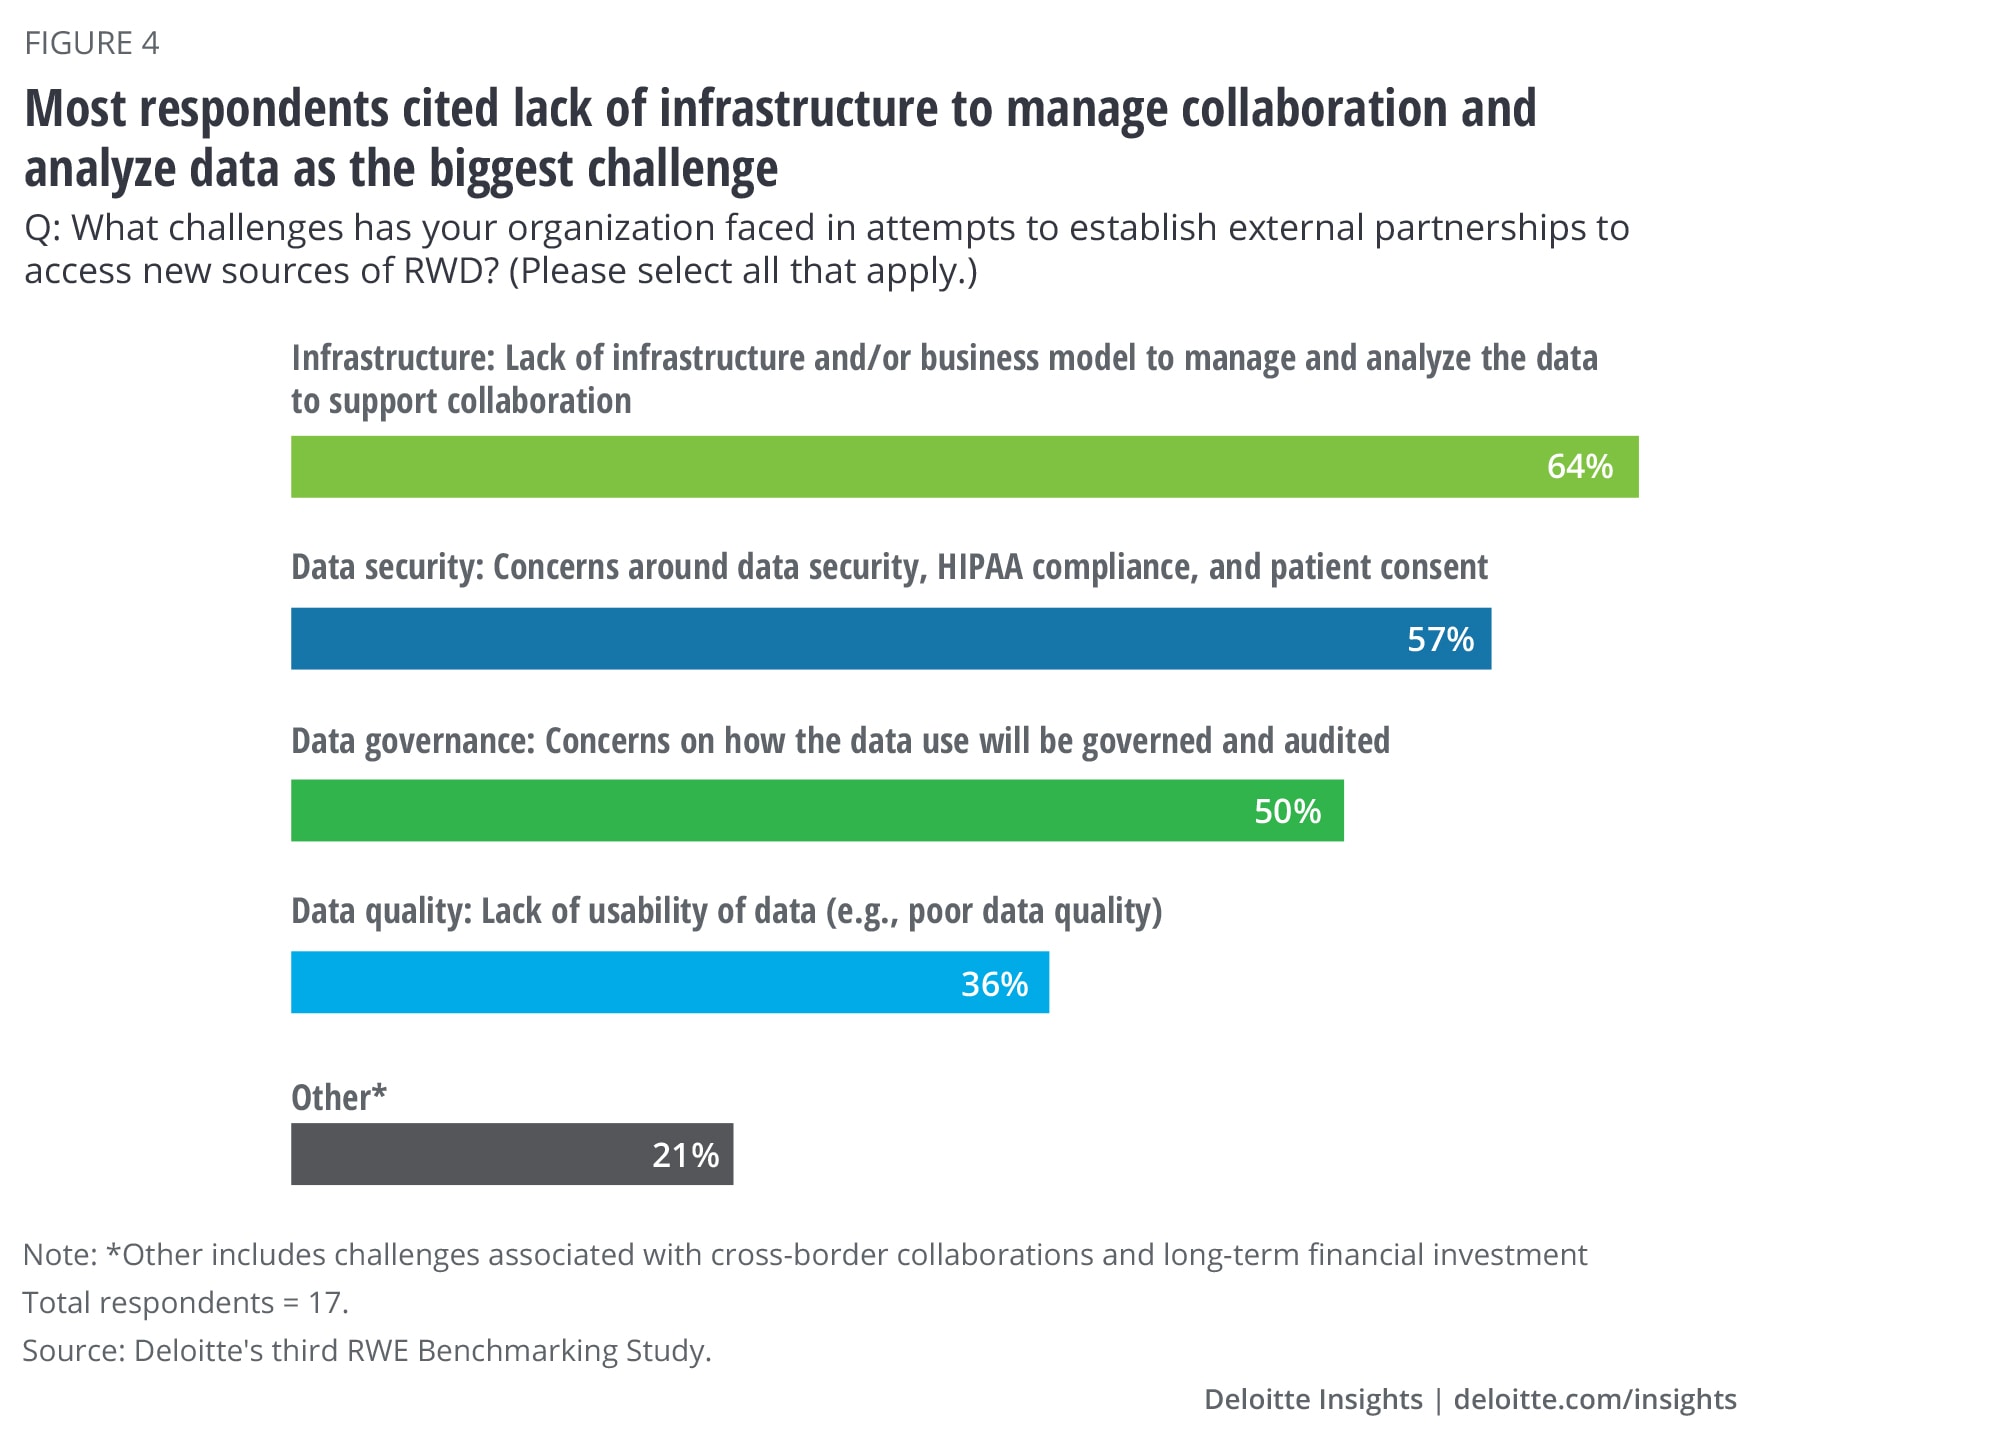 Most respondents cited lack of infrastructure to manage collaboration and analyze data as the biggest challenge